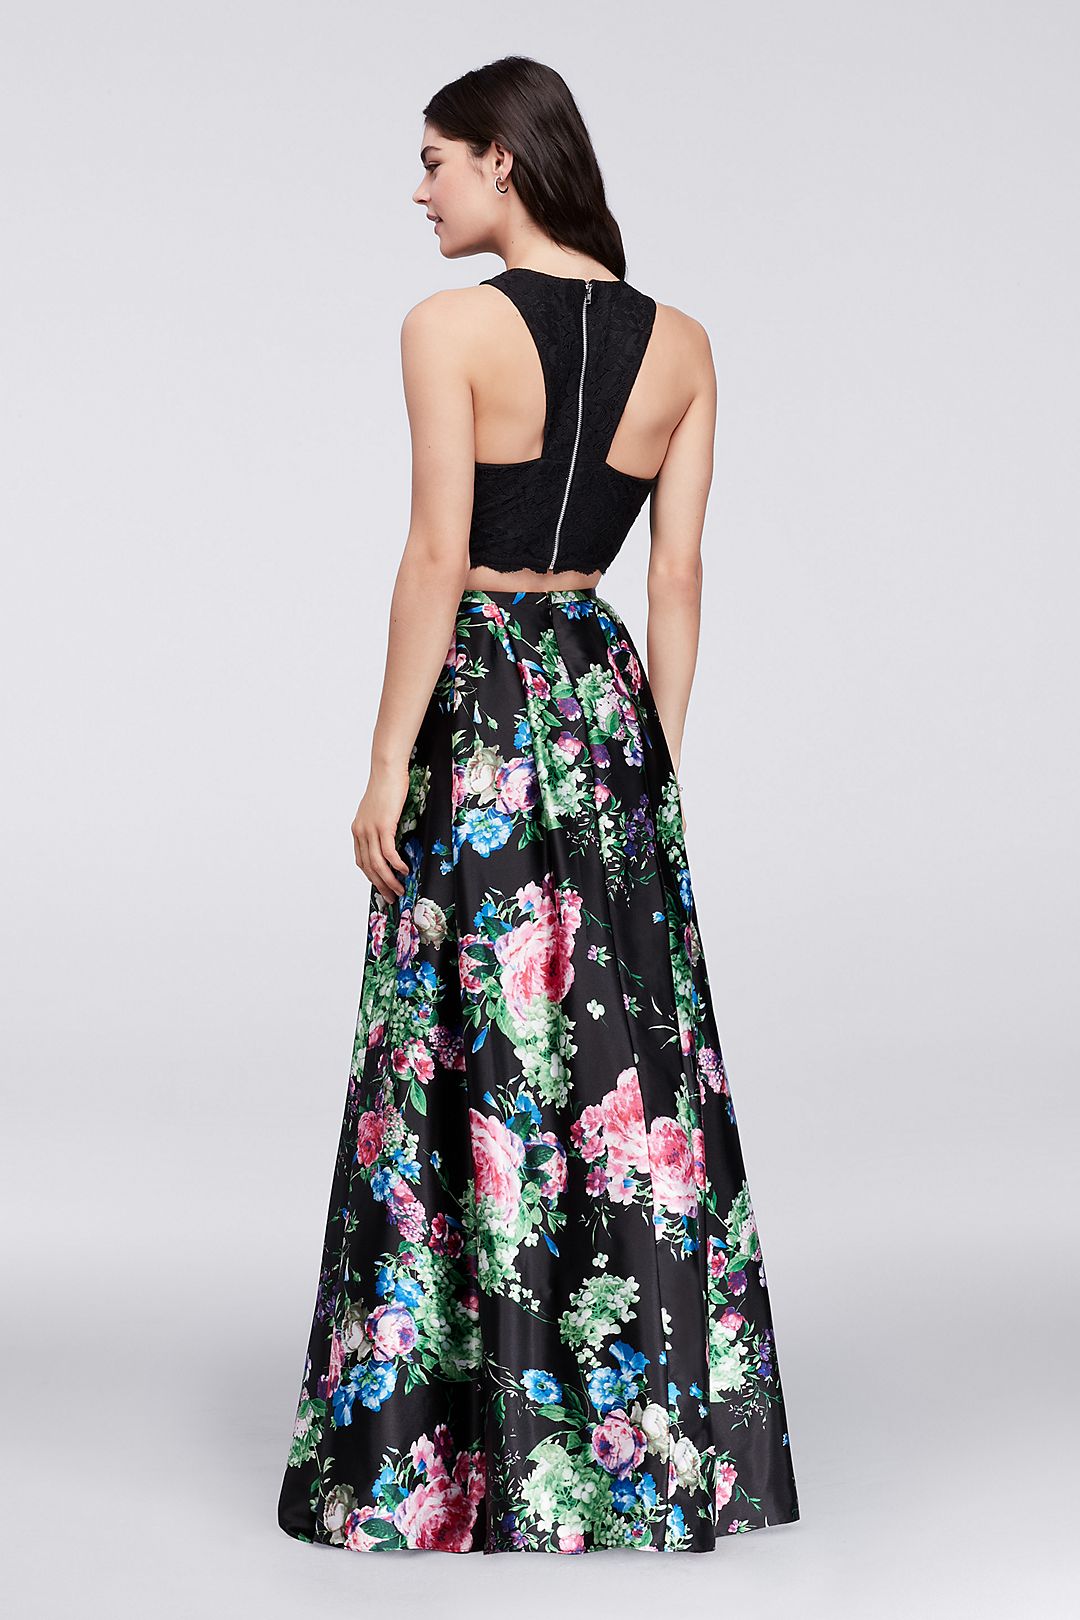 Cutaway Crop Top and Floral Skirt Two-Piece Set Image 2